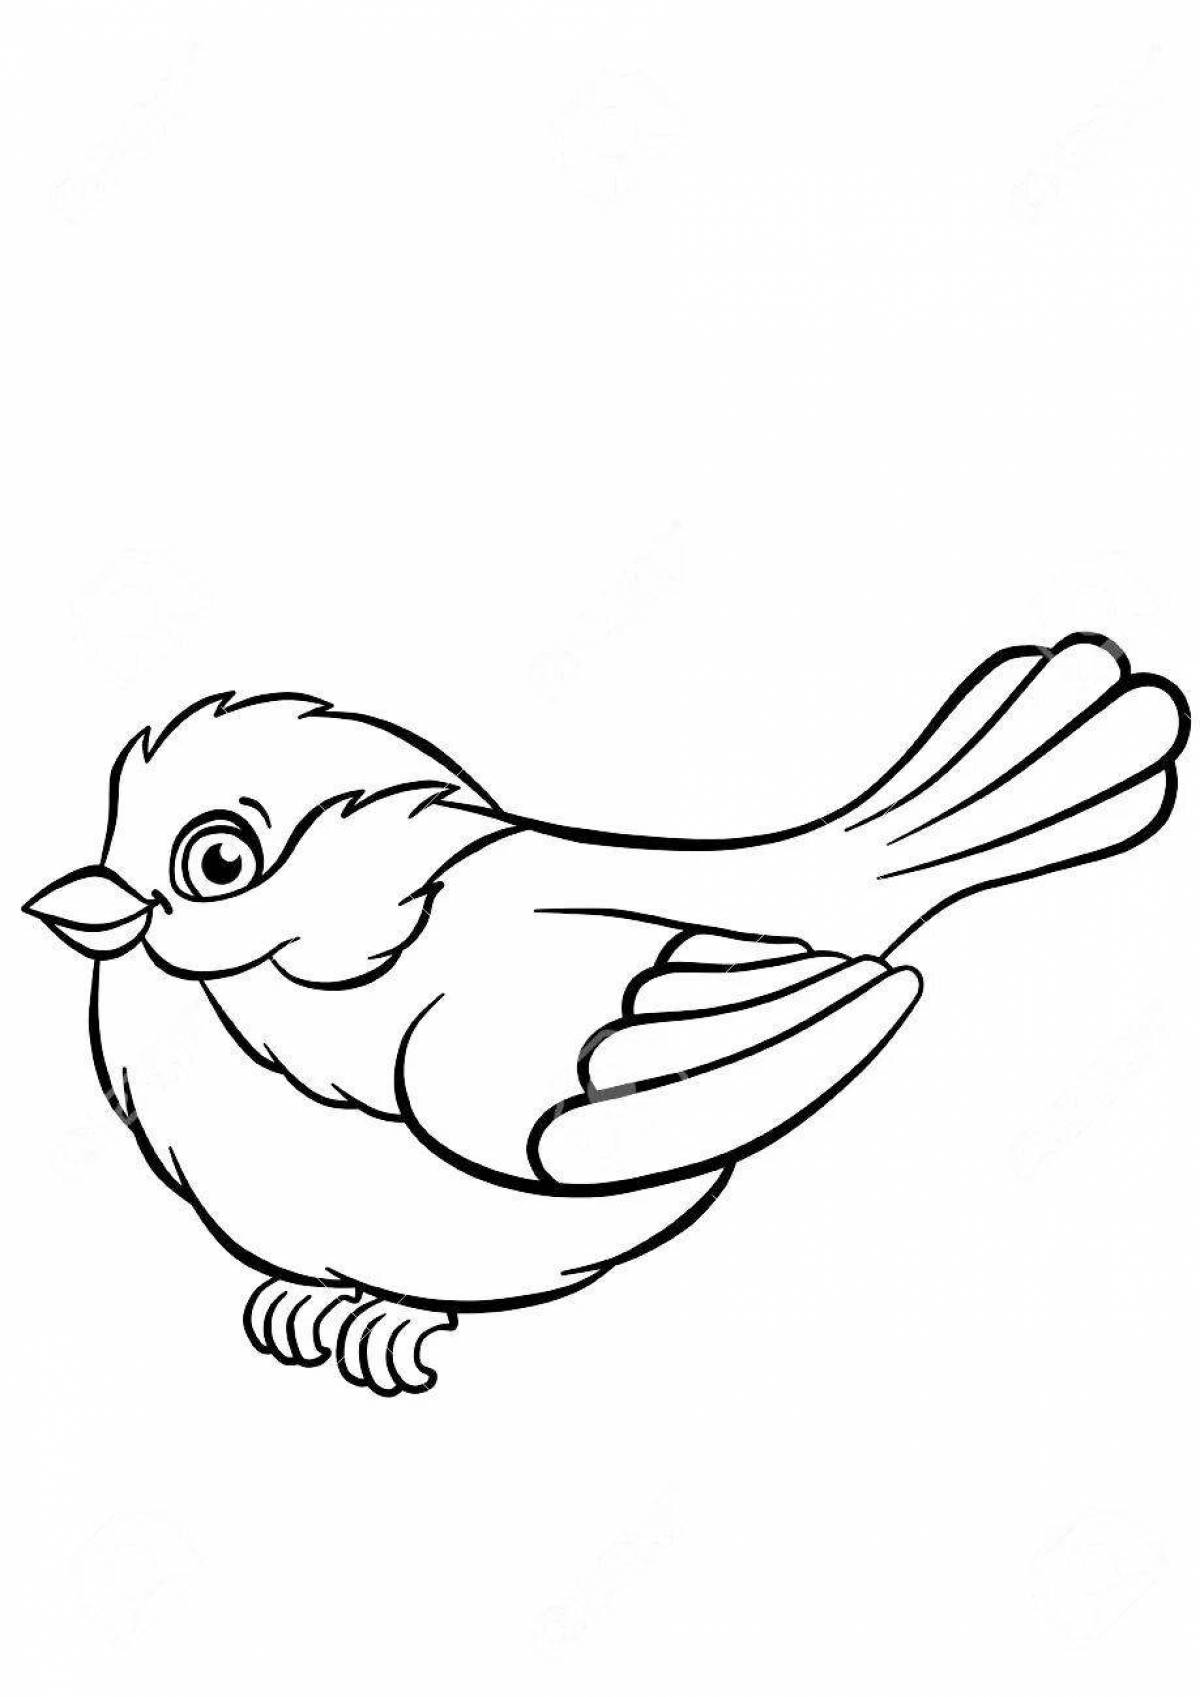 Cute sparrow coloring pages for kids